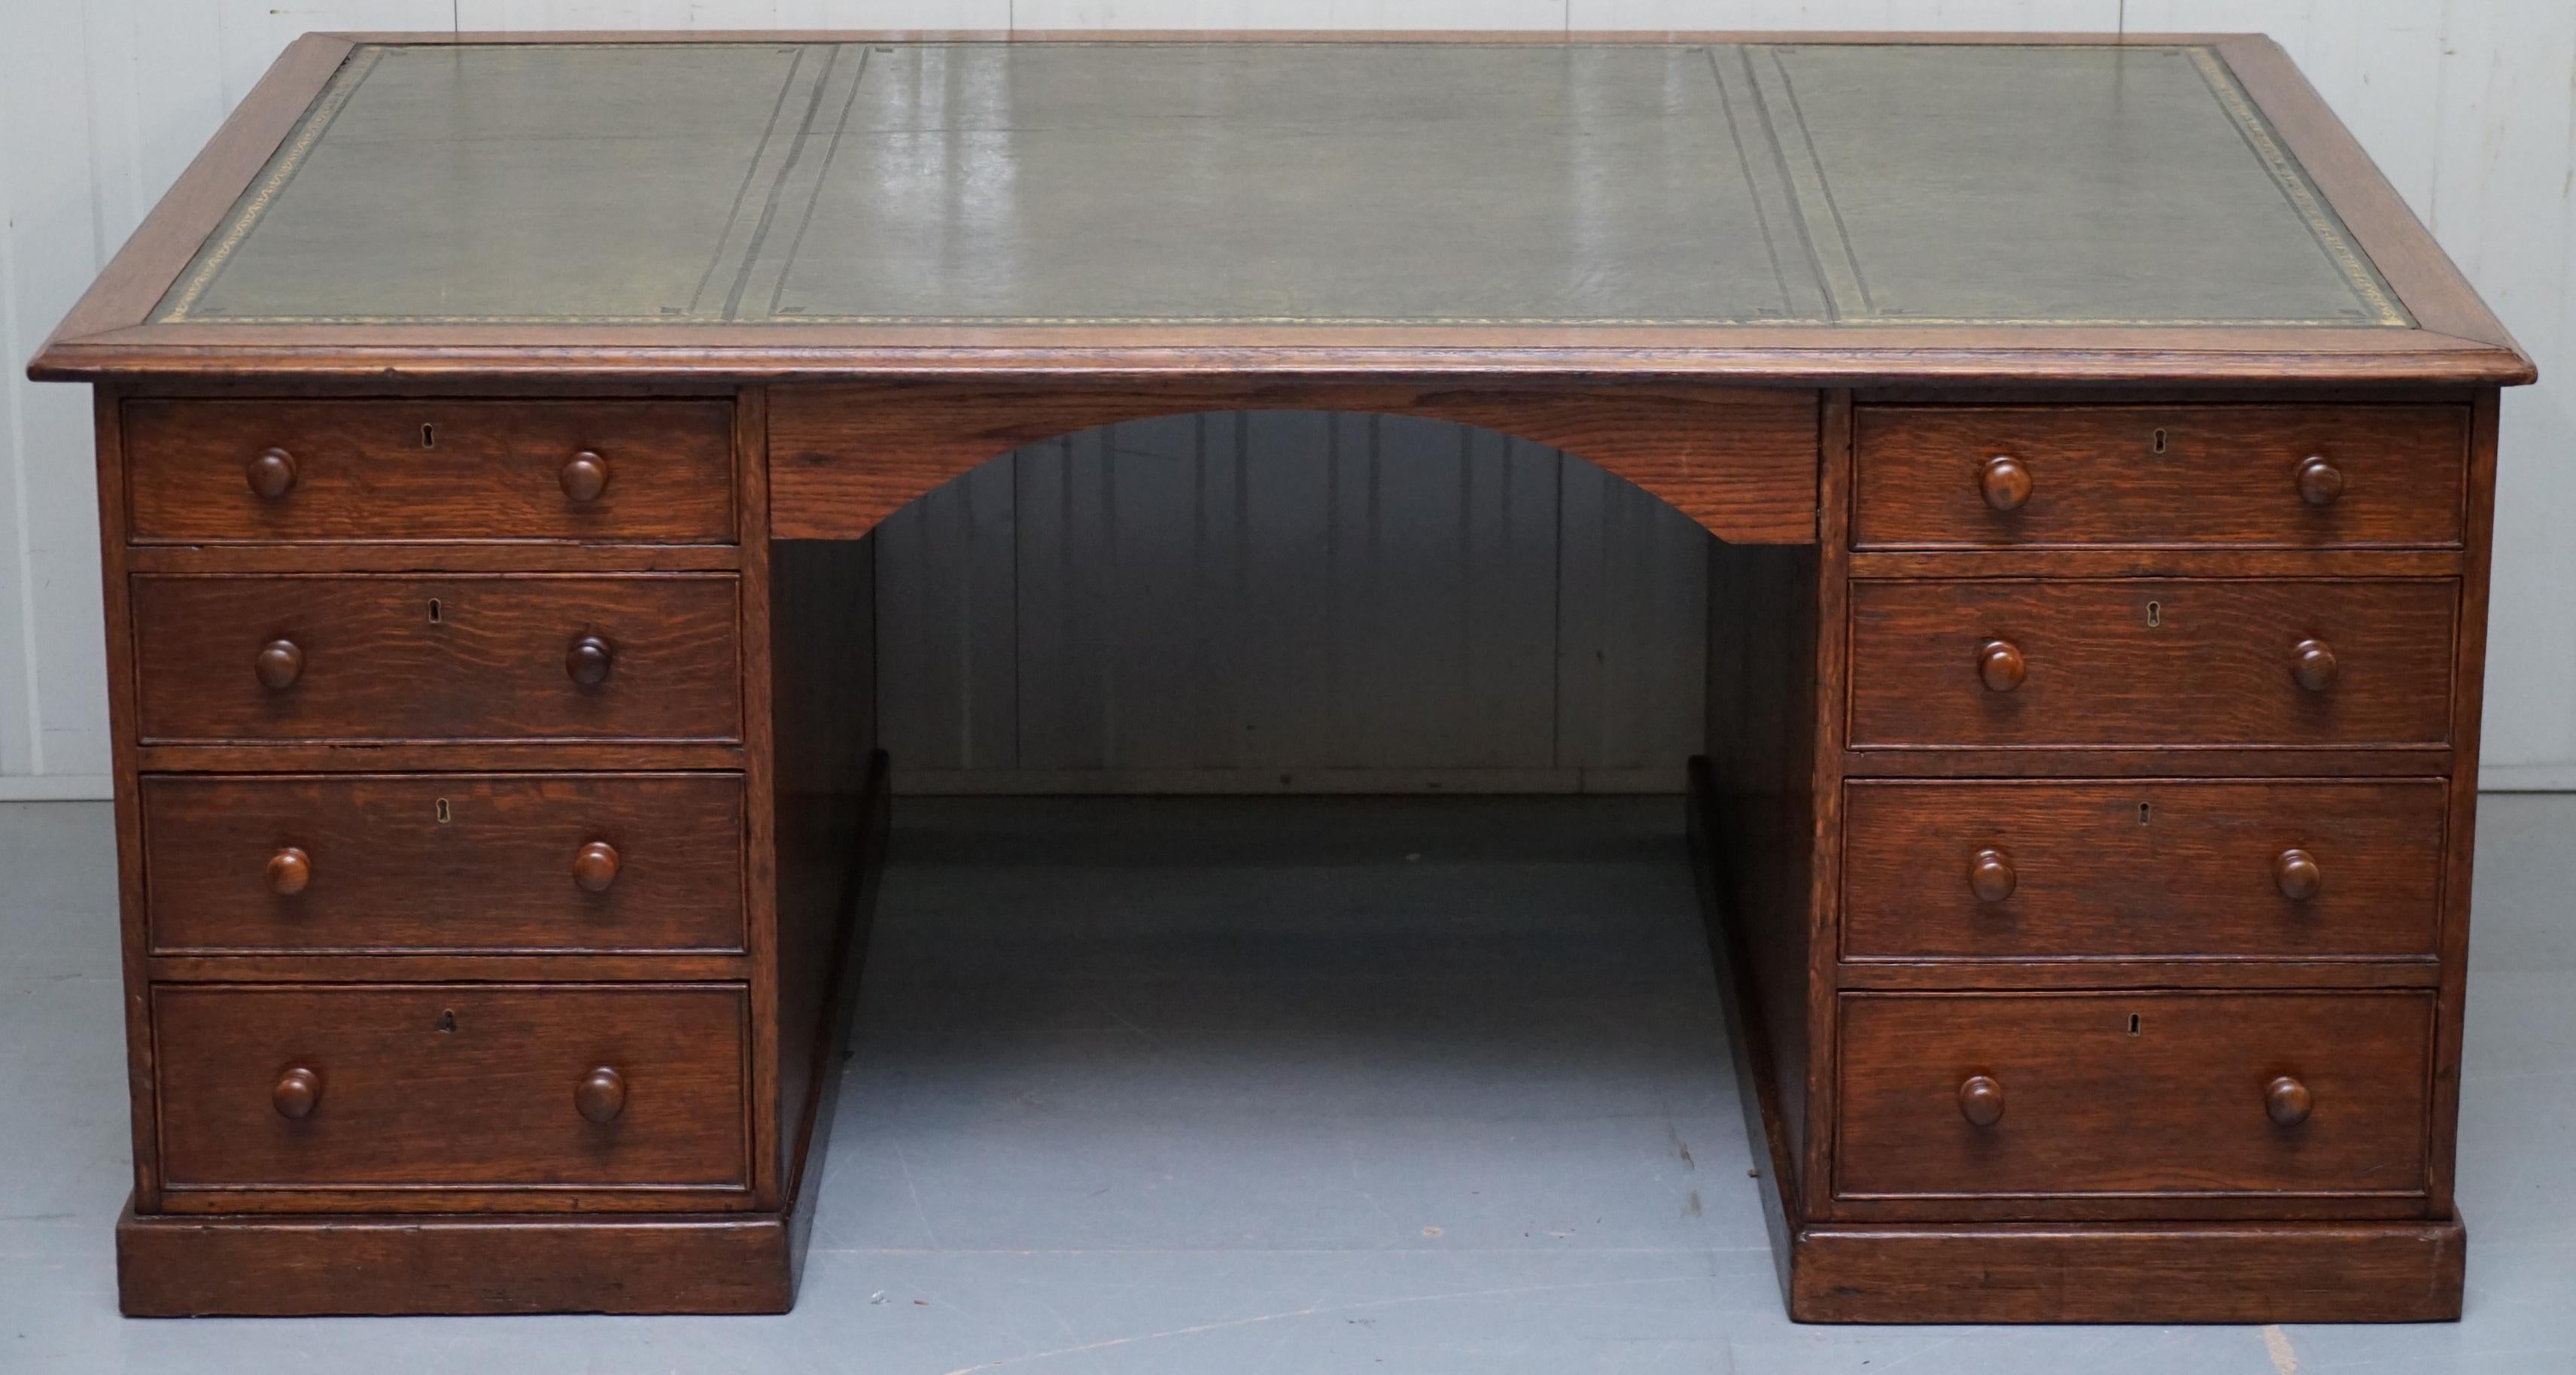 Wimbledon-Furniture

Wimbledon-Furniture is delighted to offer for sale this huge period Victorian, circa 1880 double sided solid mahogany partner desk with a green leather lot and monumental amounts of leg room

Please note the delivery fee